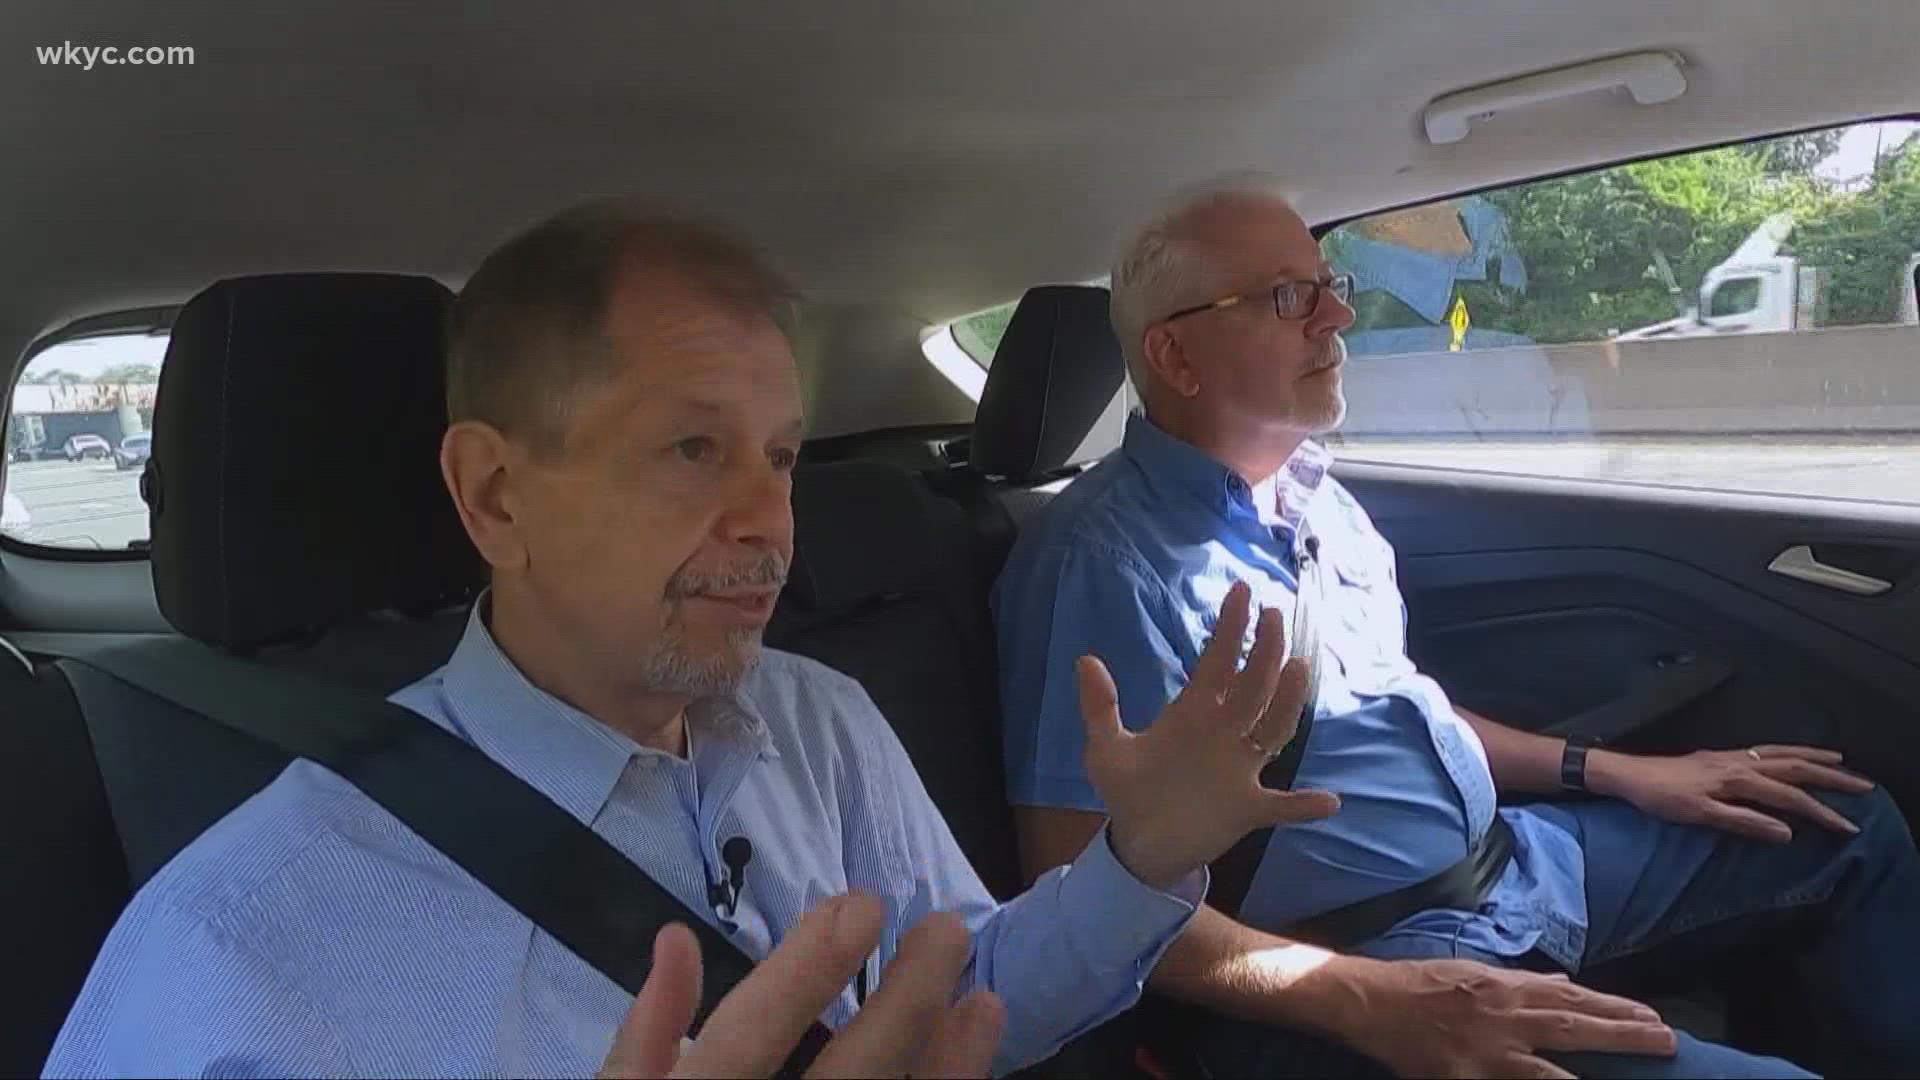 While we all remember where we were on that day, for some the WHERE - is a little more haunting. 
Will Ujek takes us on a road trip with Dick Russ and Dan Bowman.